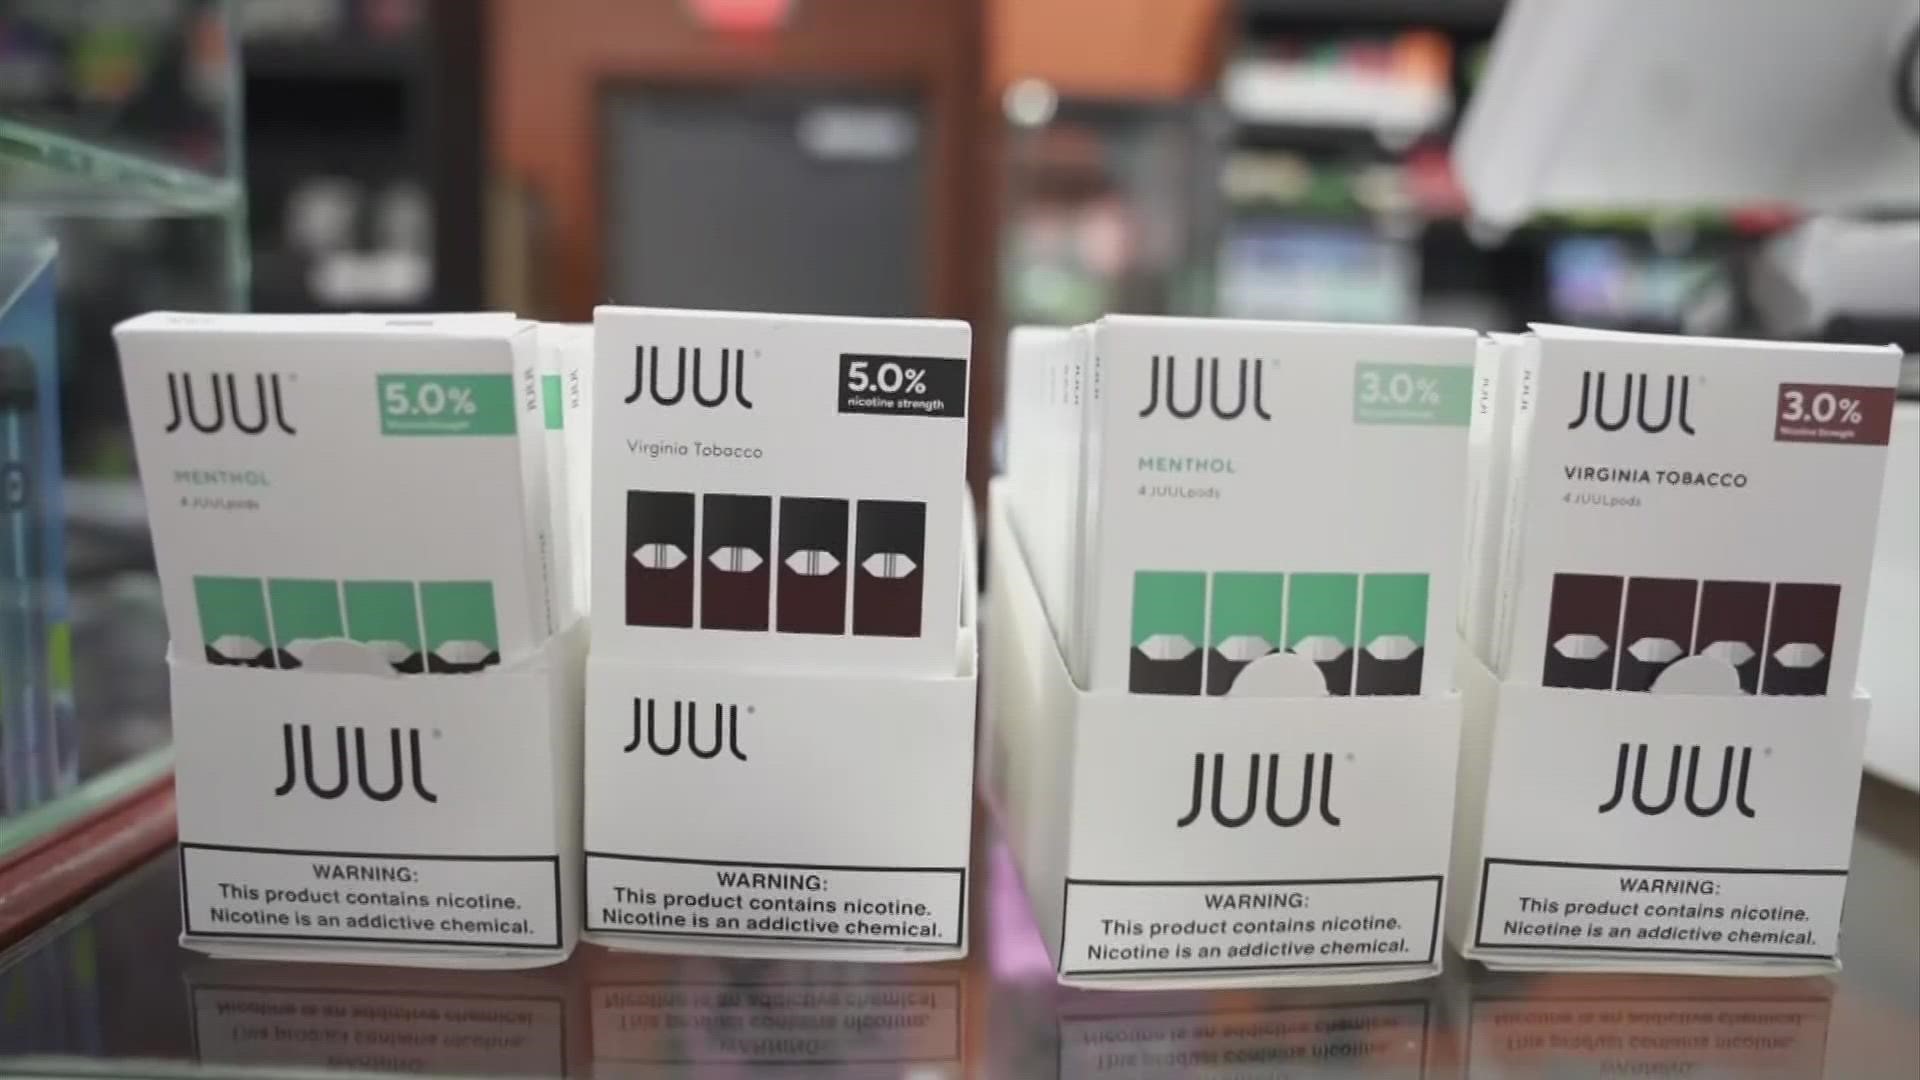 The FDA has temporarily paused its ban on Juul e-cigarette sales citing “scientific issues” it needs to review further.